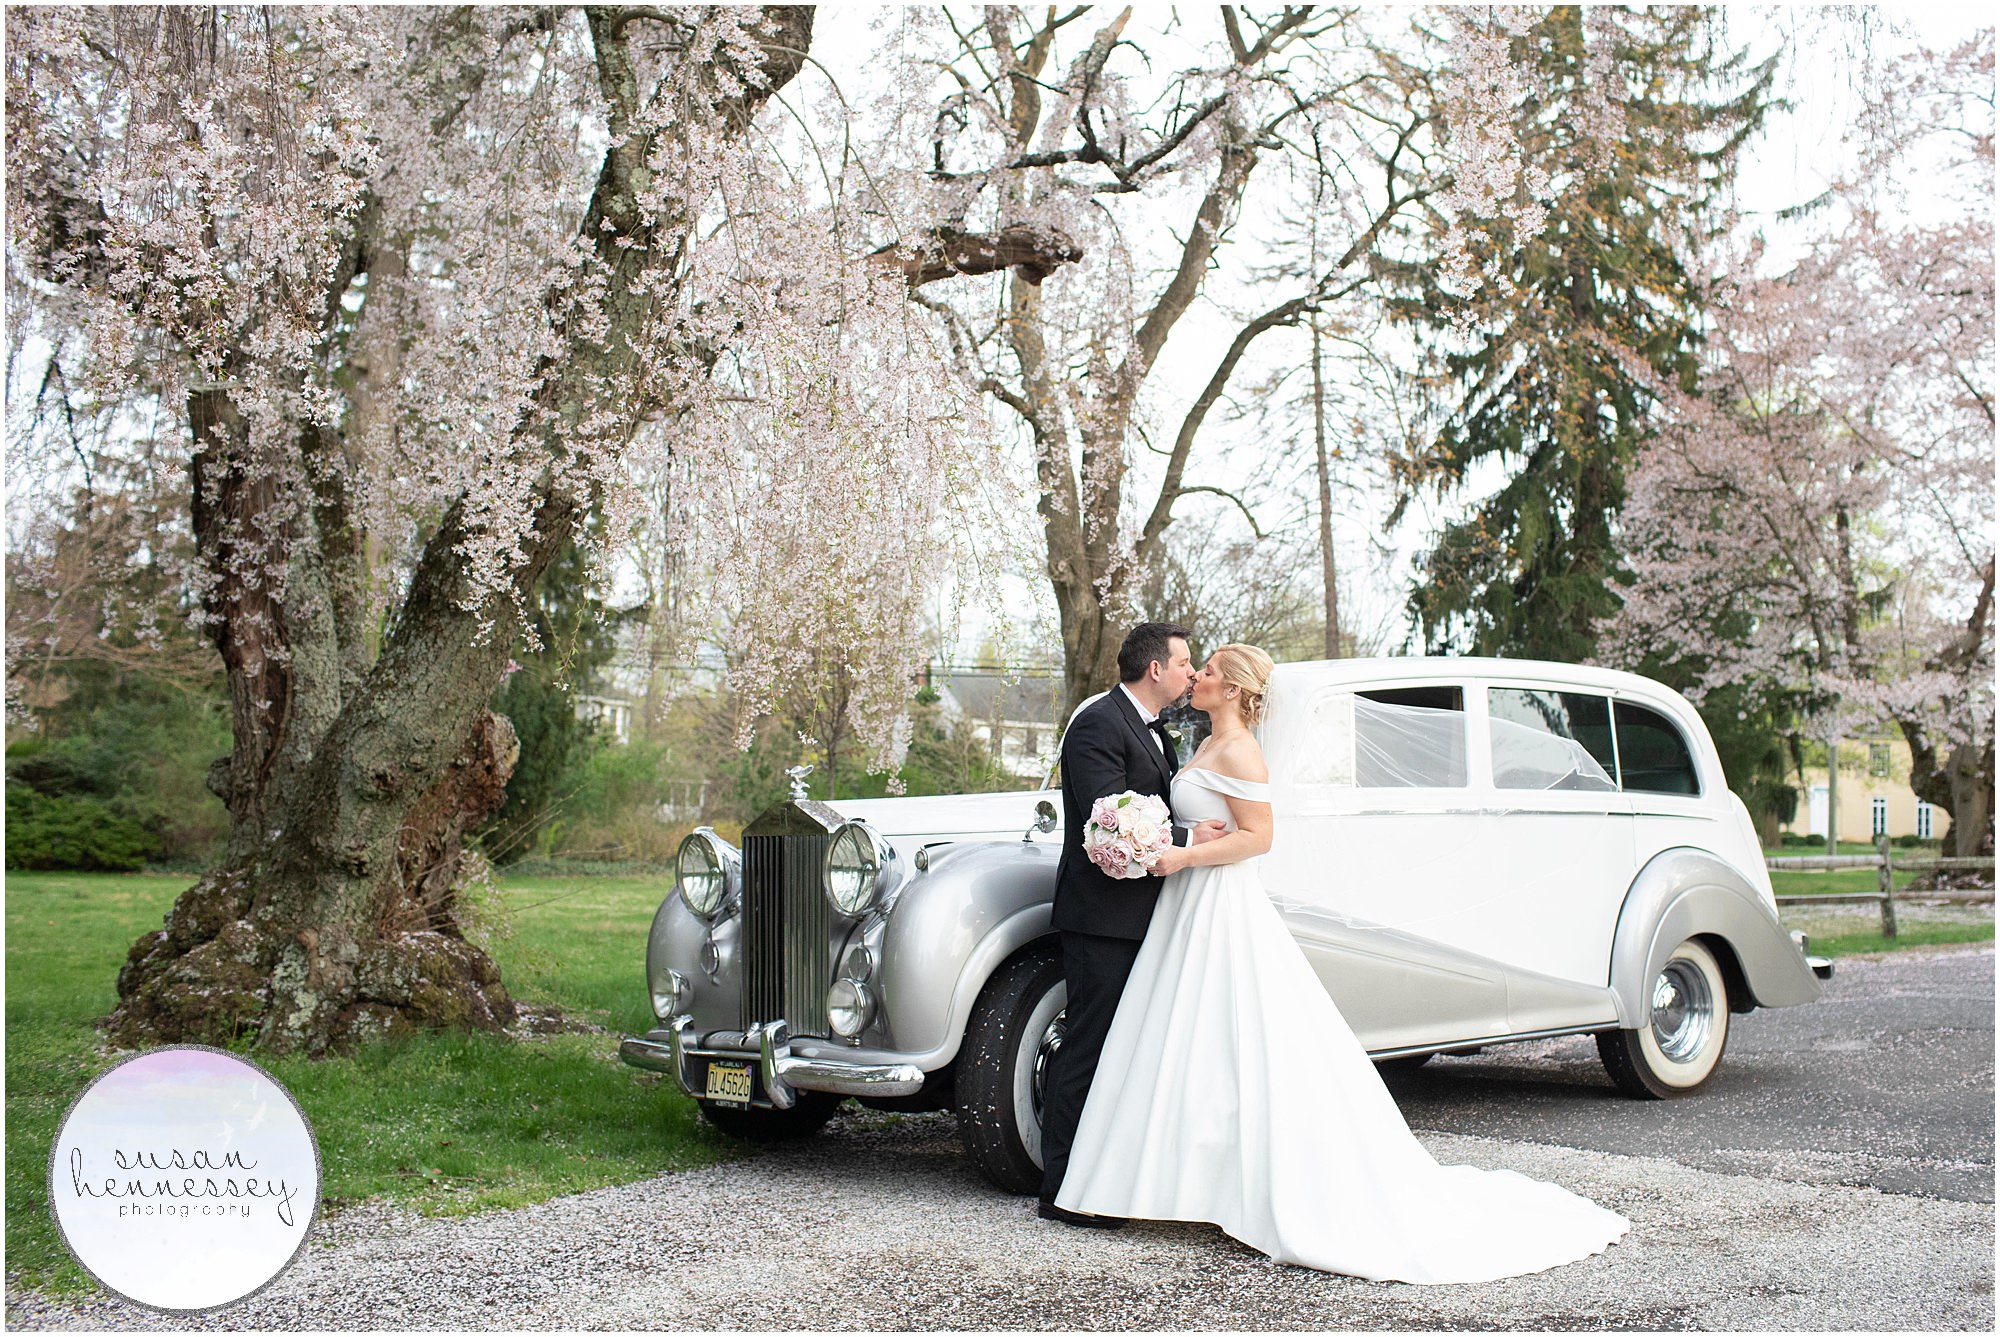 Planning a Micro Wedding? Cherry Blossoms and a Rolls Royce are stunning for wedding day portraits!